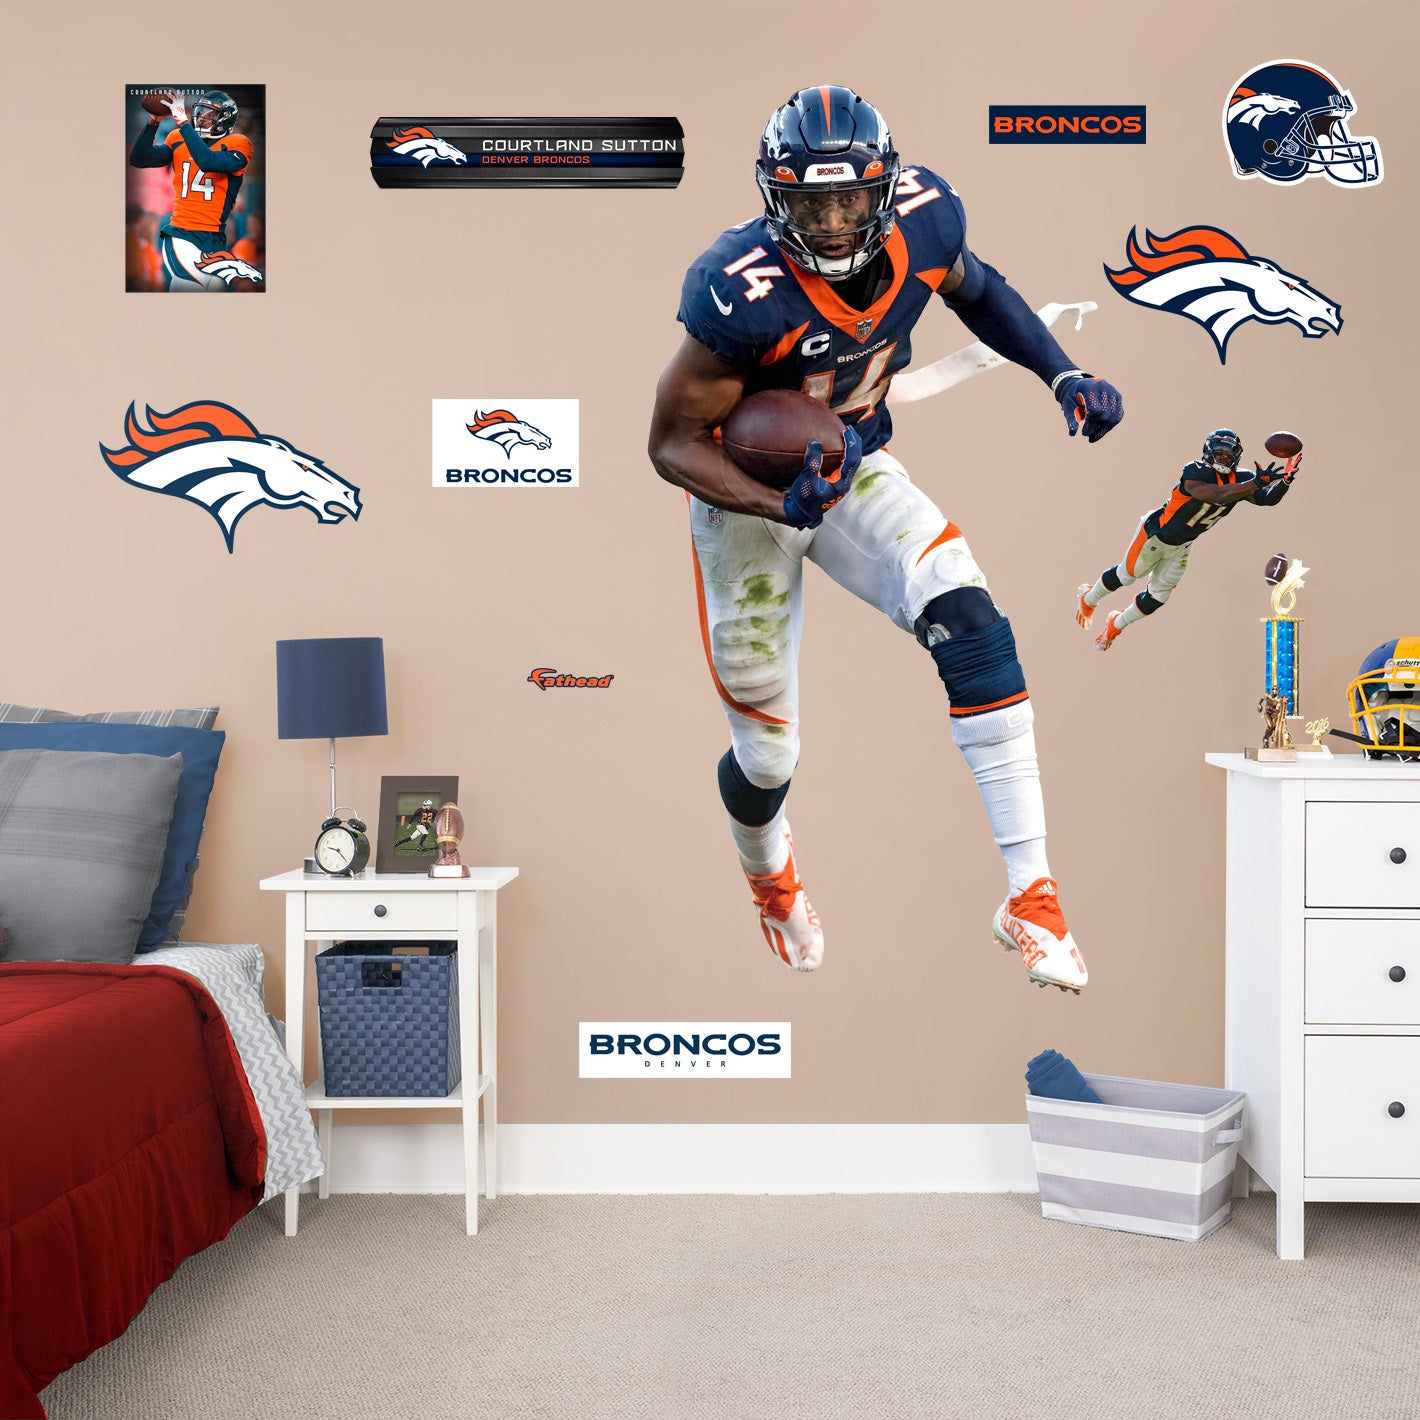 Denver Broncos: Courtland Sutton         - Officially Licensed NFL Removable     Adhesive Decal